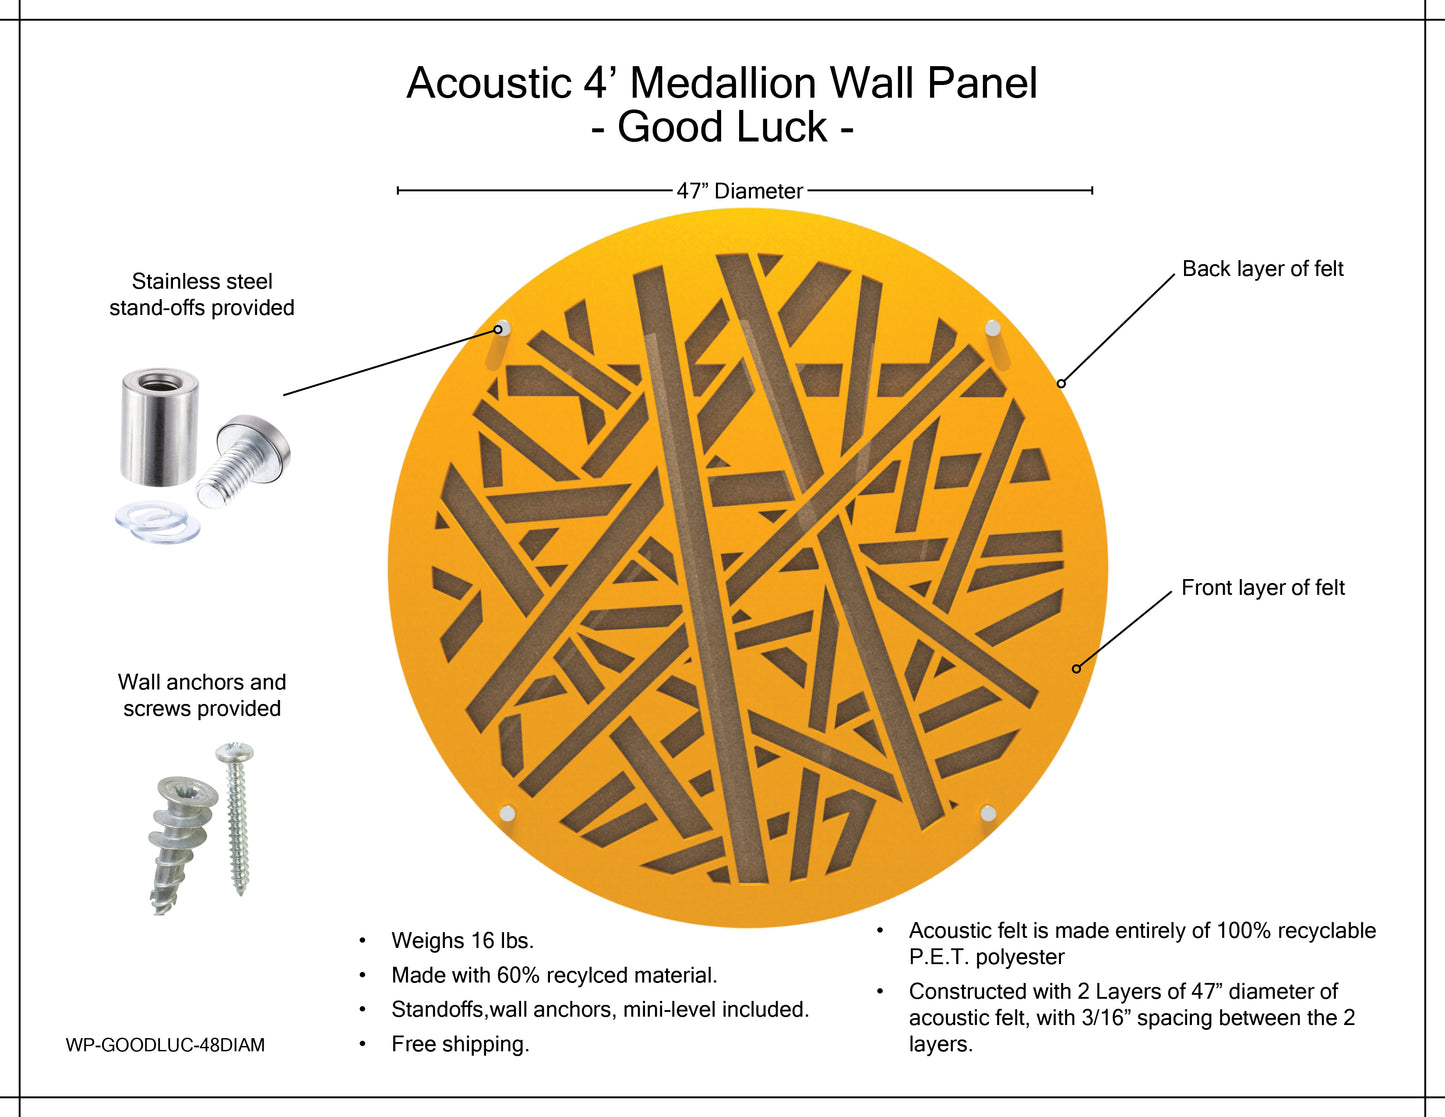 Medallion Acoustic Wall Panel - Good Luck